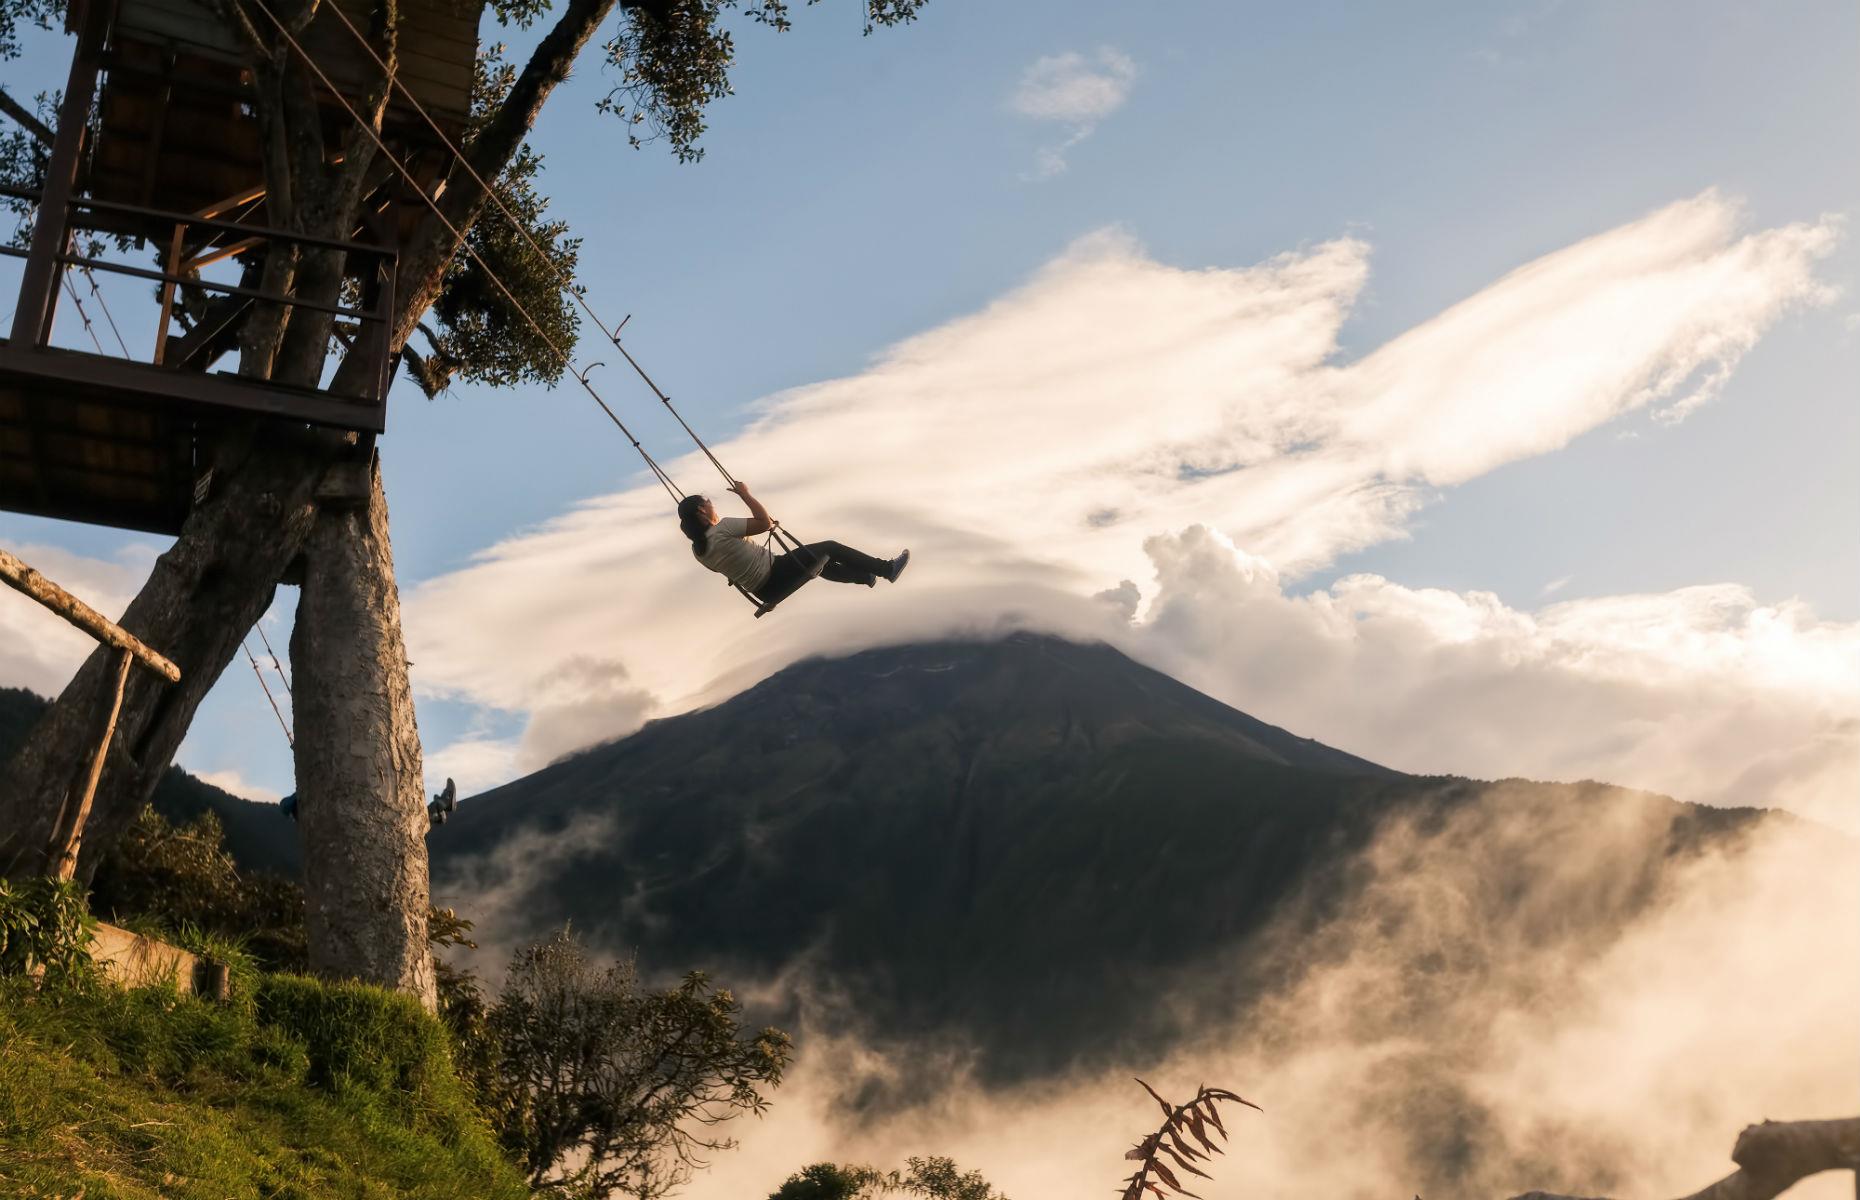 <p>Forget the playground swings you toyed with as a child; any true thrill-seeker will want to head to the Swing at the End of the World in Banos. The swing gives visitors beautiful views of the Tungurahua Volcano, and also the chance to earn some serious Instagram kudos. Plus, even though it looks like you could fall off and tumble over a cliff, the photos are misleading: you actually swing over a steep slope rather than a cliff edge. Scary, but not as perilous as it first seems.</p>